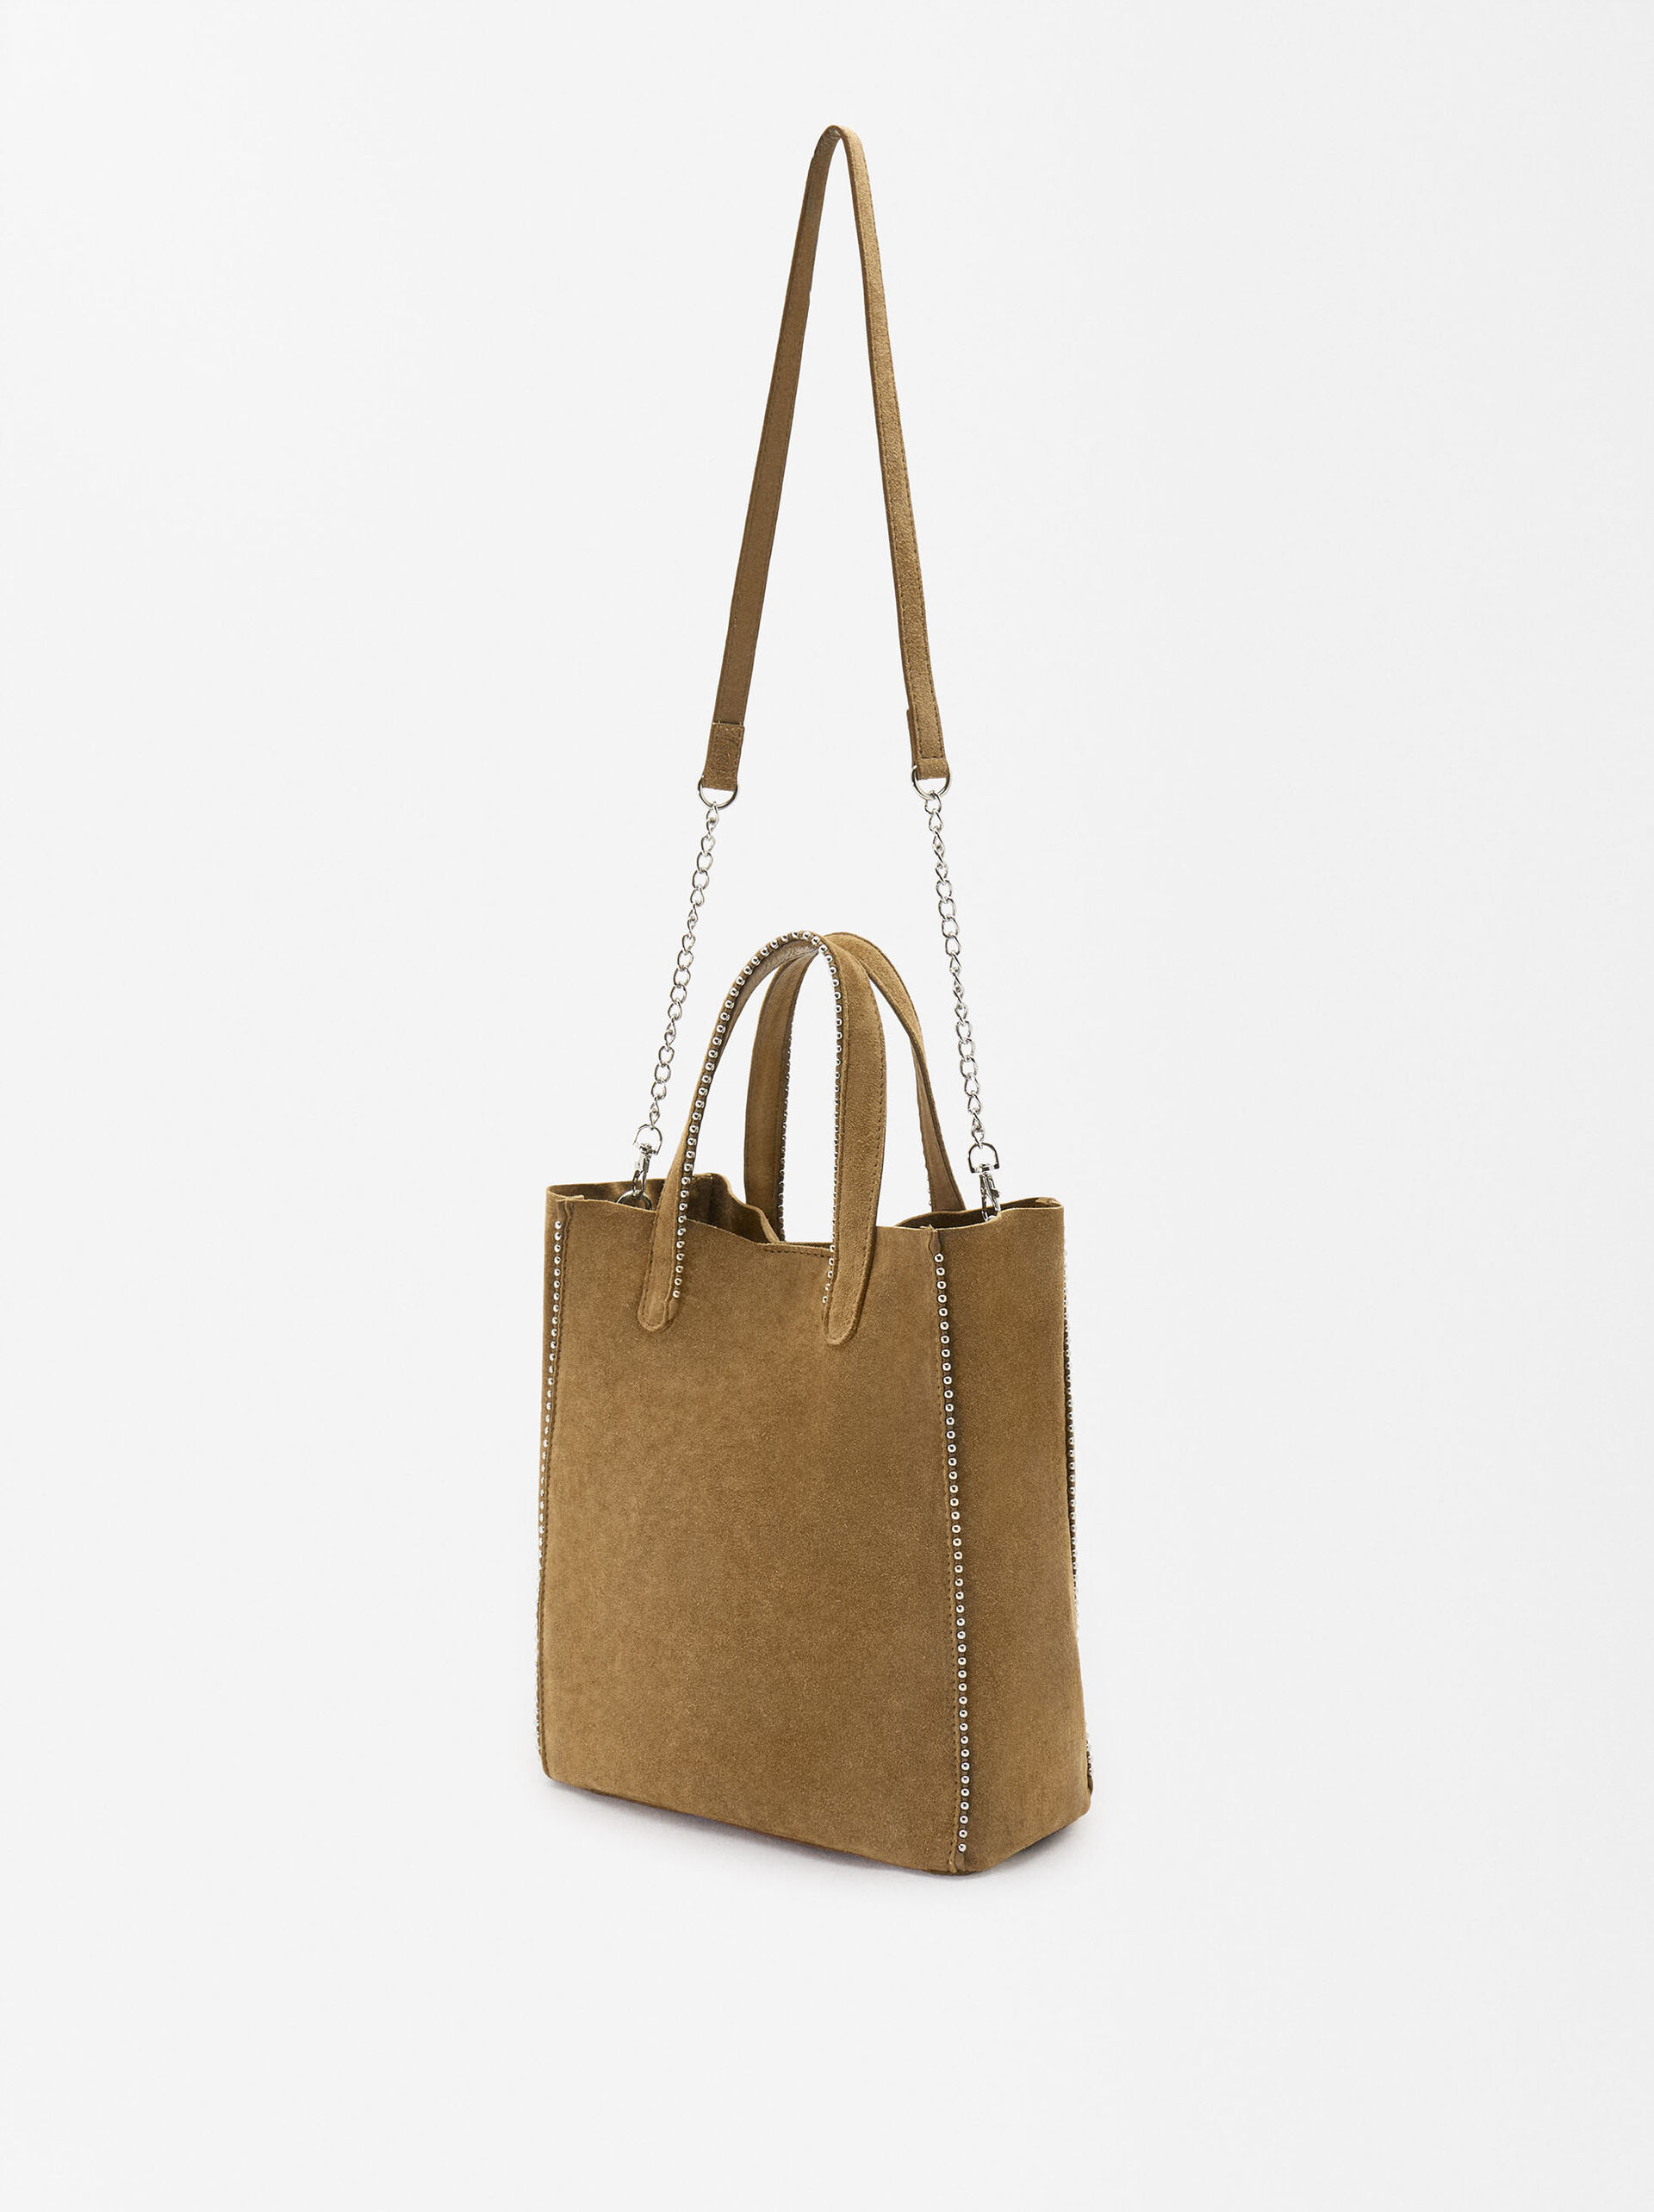 Leather Tote Bag With Pendant - Limited Edition image number 2.0